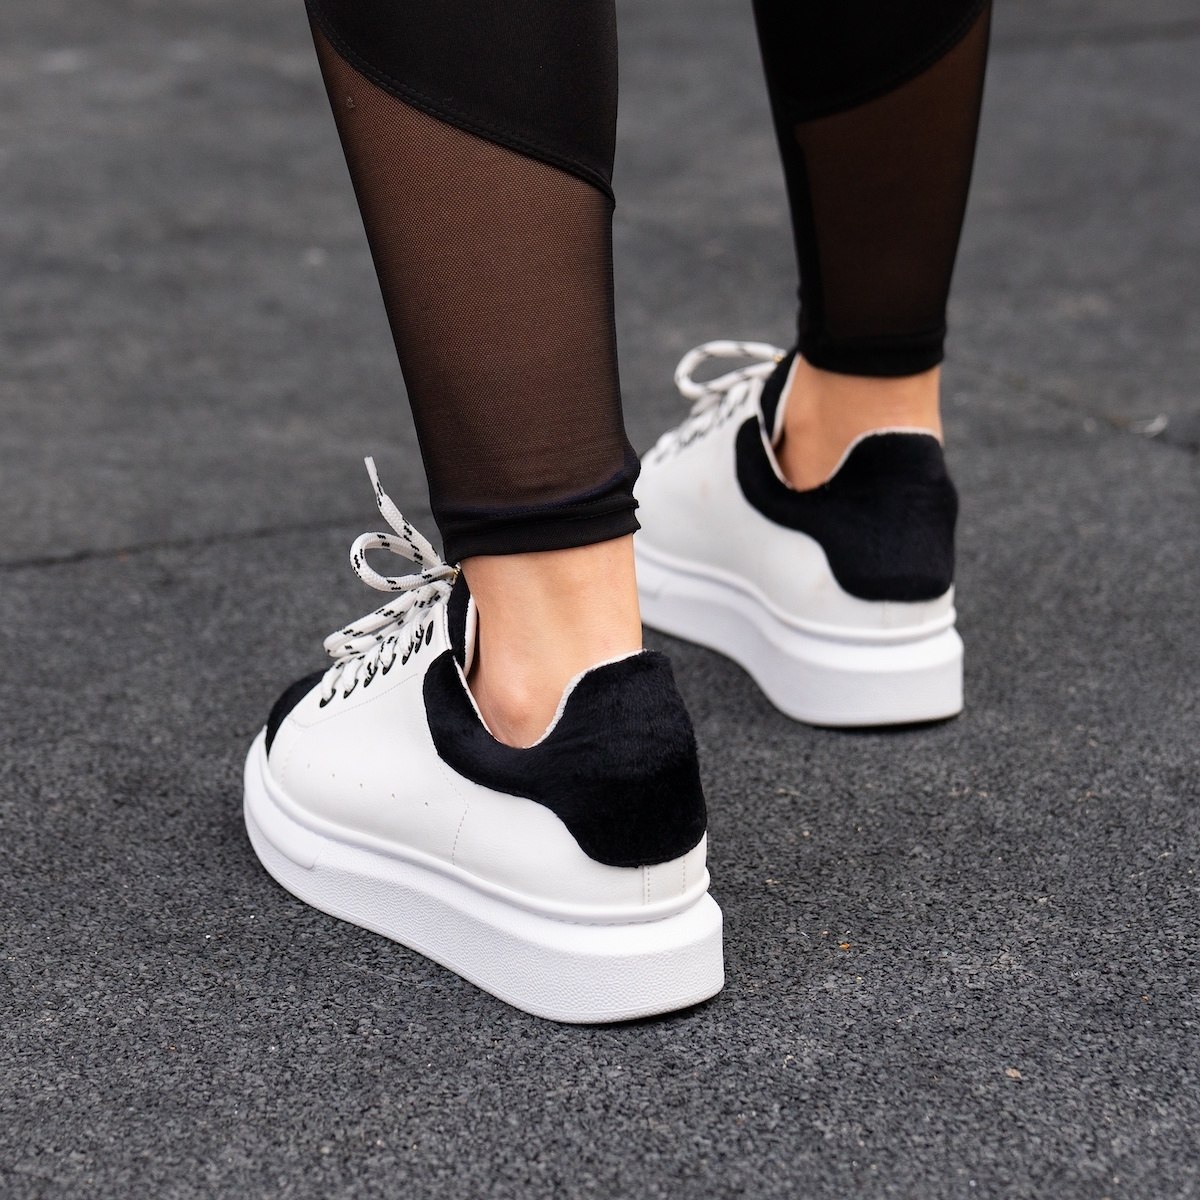 Woman Hype Sole Sneakers in White-Partial Short Black Fur | Martin Valen